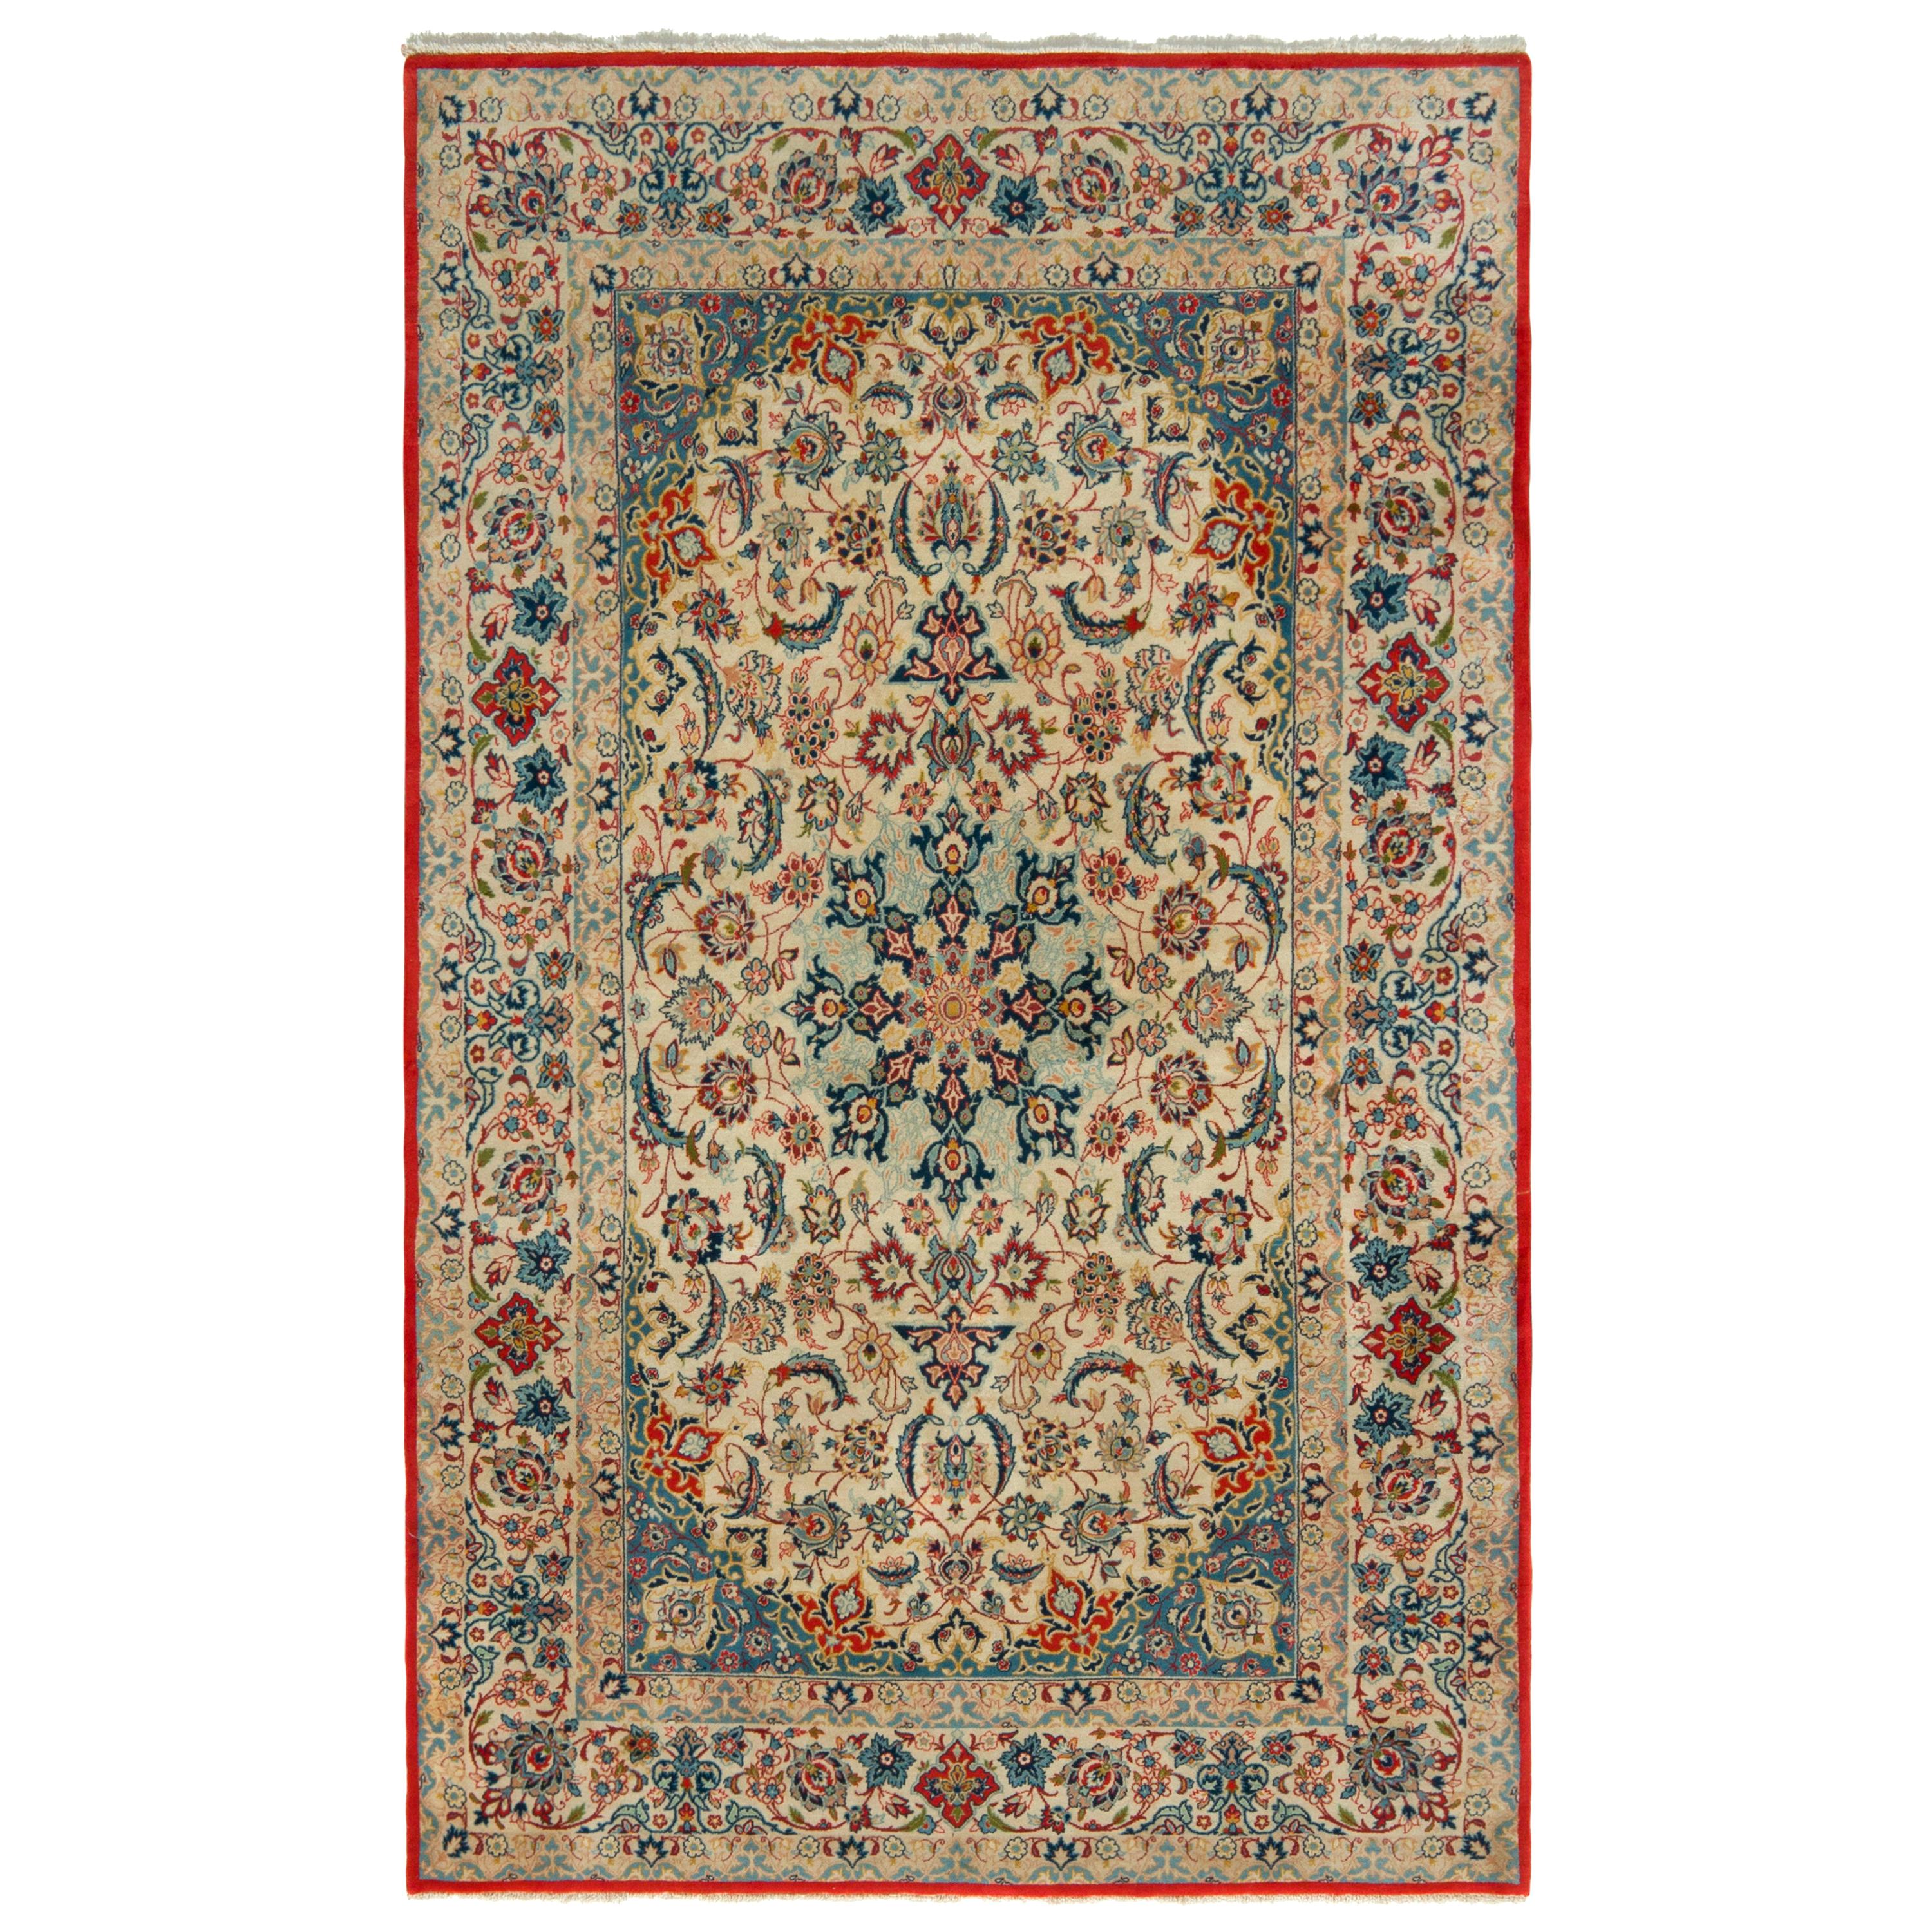 Vintage Isfahan Rug in Beige Blue and Red Persian Floral Pattern by Rug & Kilim For Sale